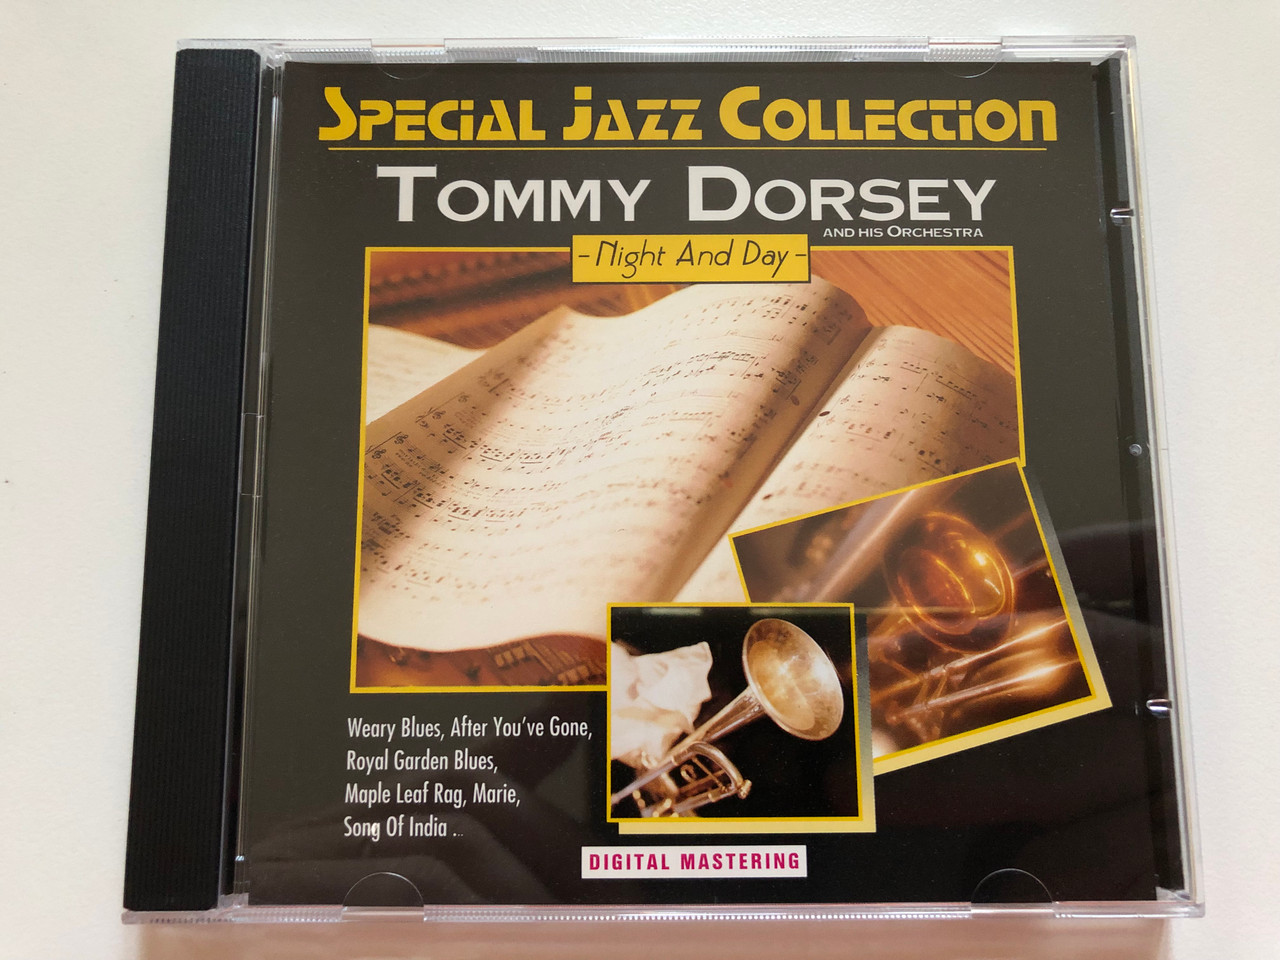 https://cdn10.bigcommerce.com/s-62bdpkt7pb/products/0/images/259192/Special_Jazz_Collection_-_Tommy_Dorsey_and_his_Orchestra_-_Night_And_Day_Weary_Blues_After_Youve_Gone_Royal_Garden_Blues_Maple_Leaf_Rag_Marie_Song_Of_India..._Digital_Mastering_WZ_A_1__85613.1669116374.1280.1280.JPG?c=2&_gl=1*tt71nf*_ga*MjA2NTIxMjE2MC4xNTkwNTEyNTMy*_ga_WS2VZYPC6G*MTY2OTEwODAwNS42MzcuMS4xNjY5MTE2MzE4LjYwLjAuMA..